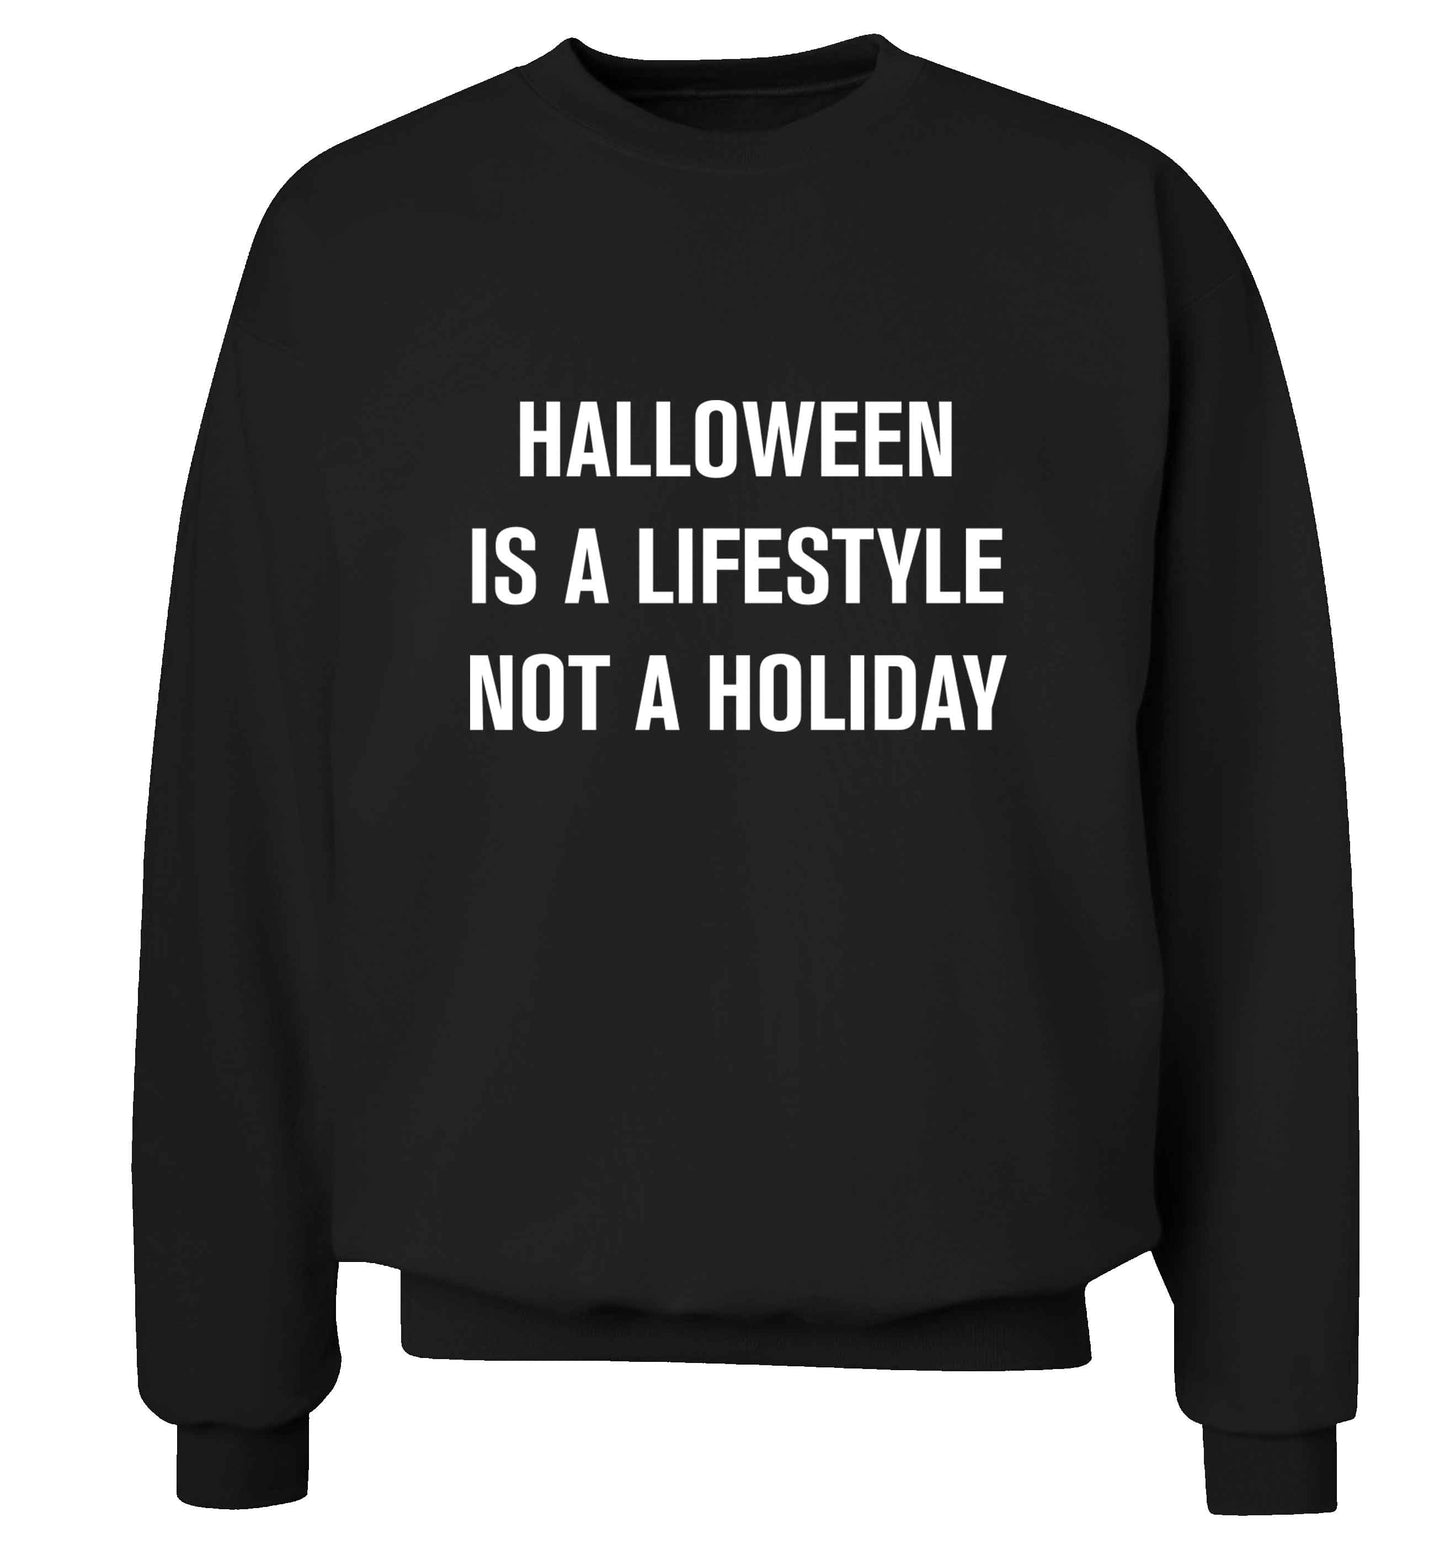 Halloween is a lifestyle not a holiday adult's unisex black sweater 2XL